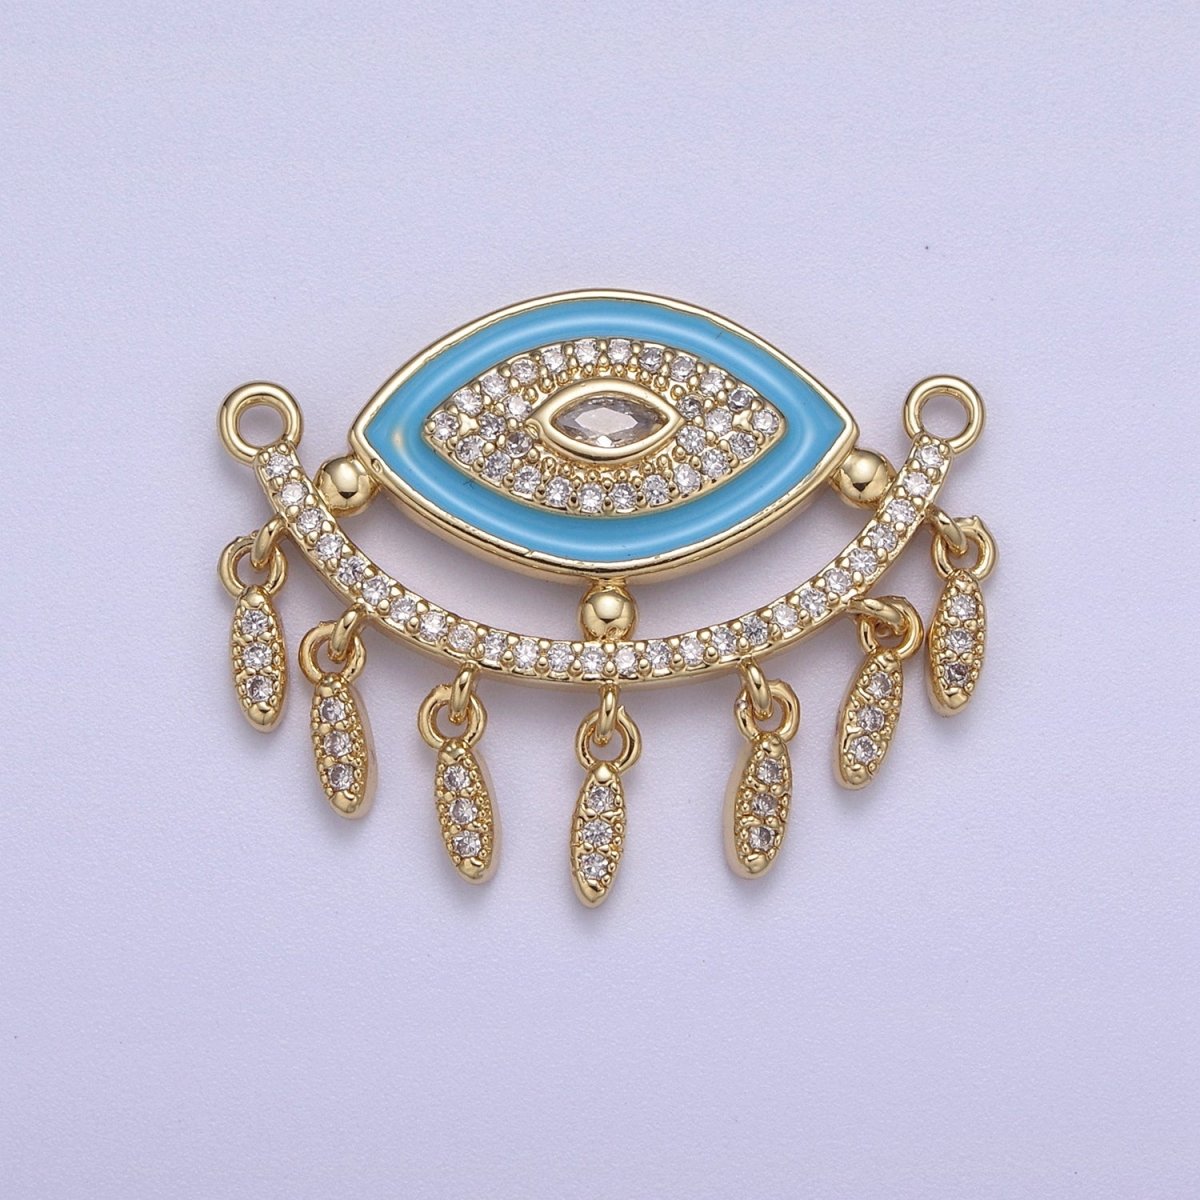 24K Gold Filled Evil Eye Charm Connector for Necklace Pendant Dangle CZ Eye Link Connector Double Bail F-253 - DLUXCA